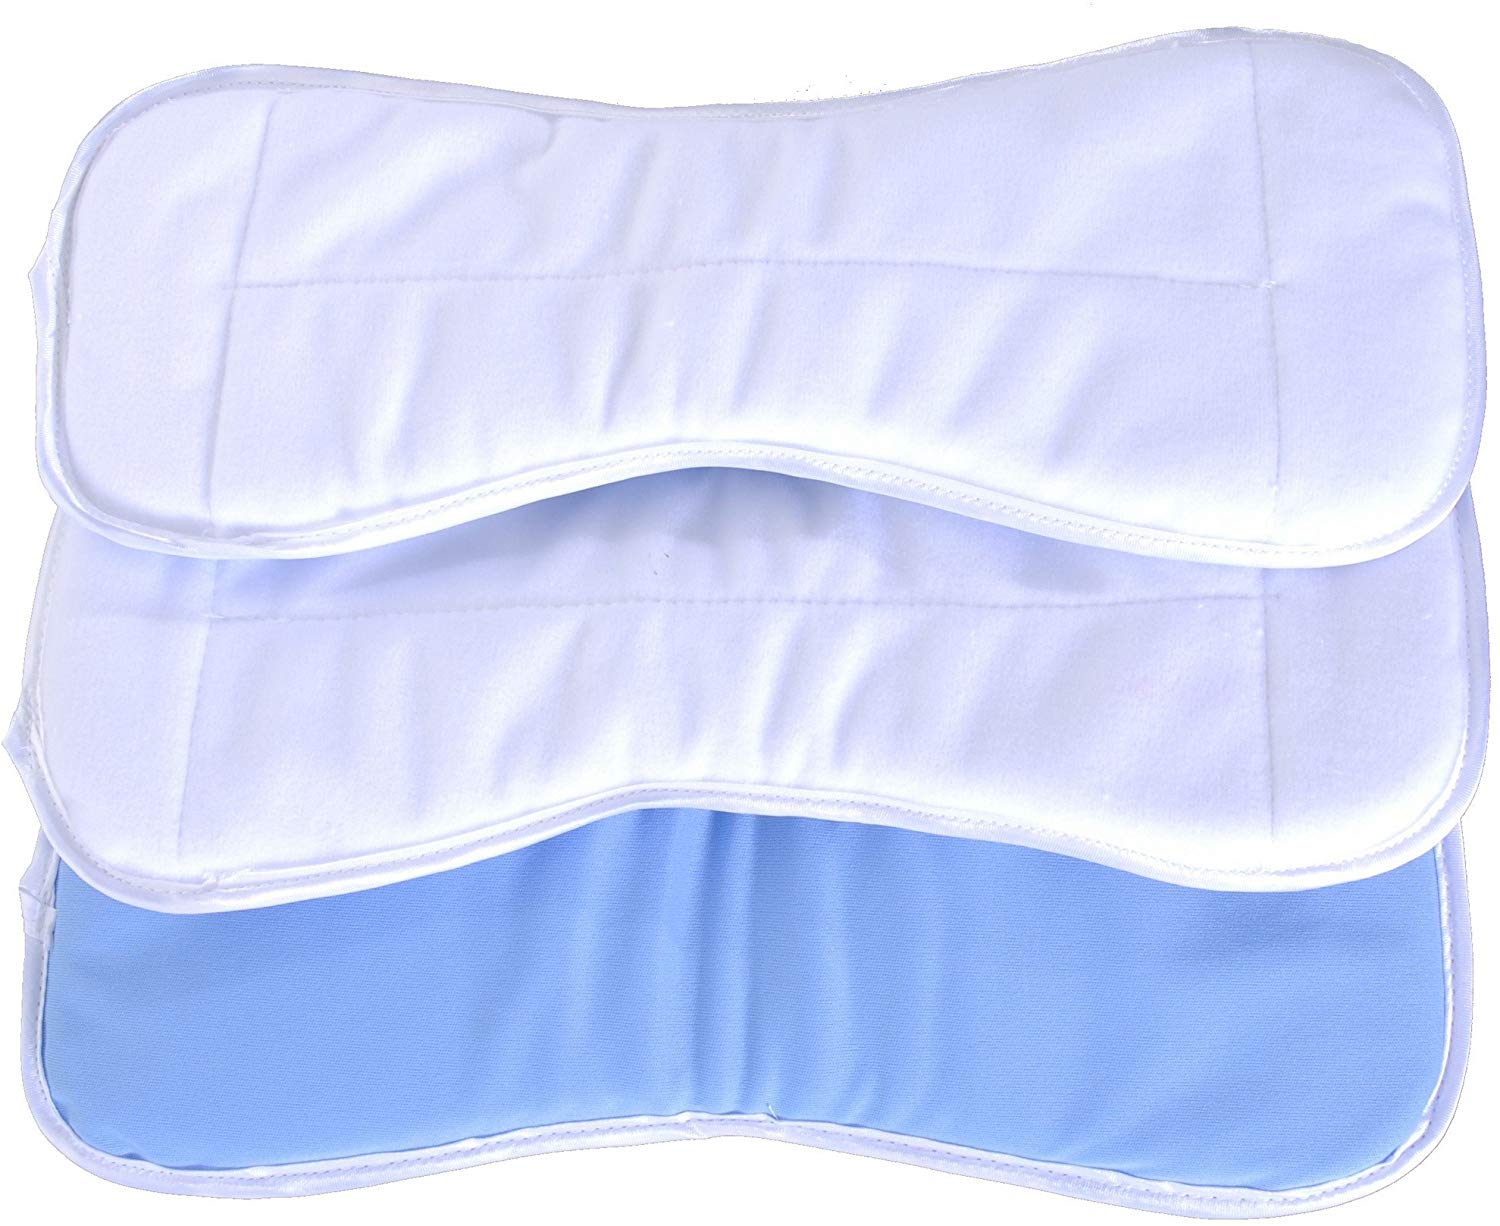 REUSABLE INCONTINENCE PADS